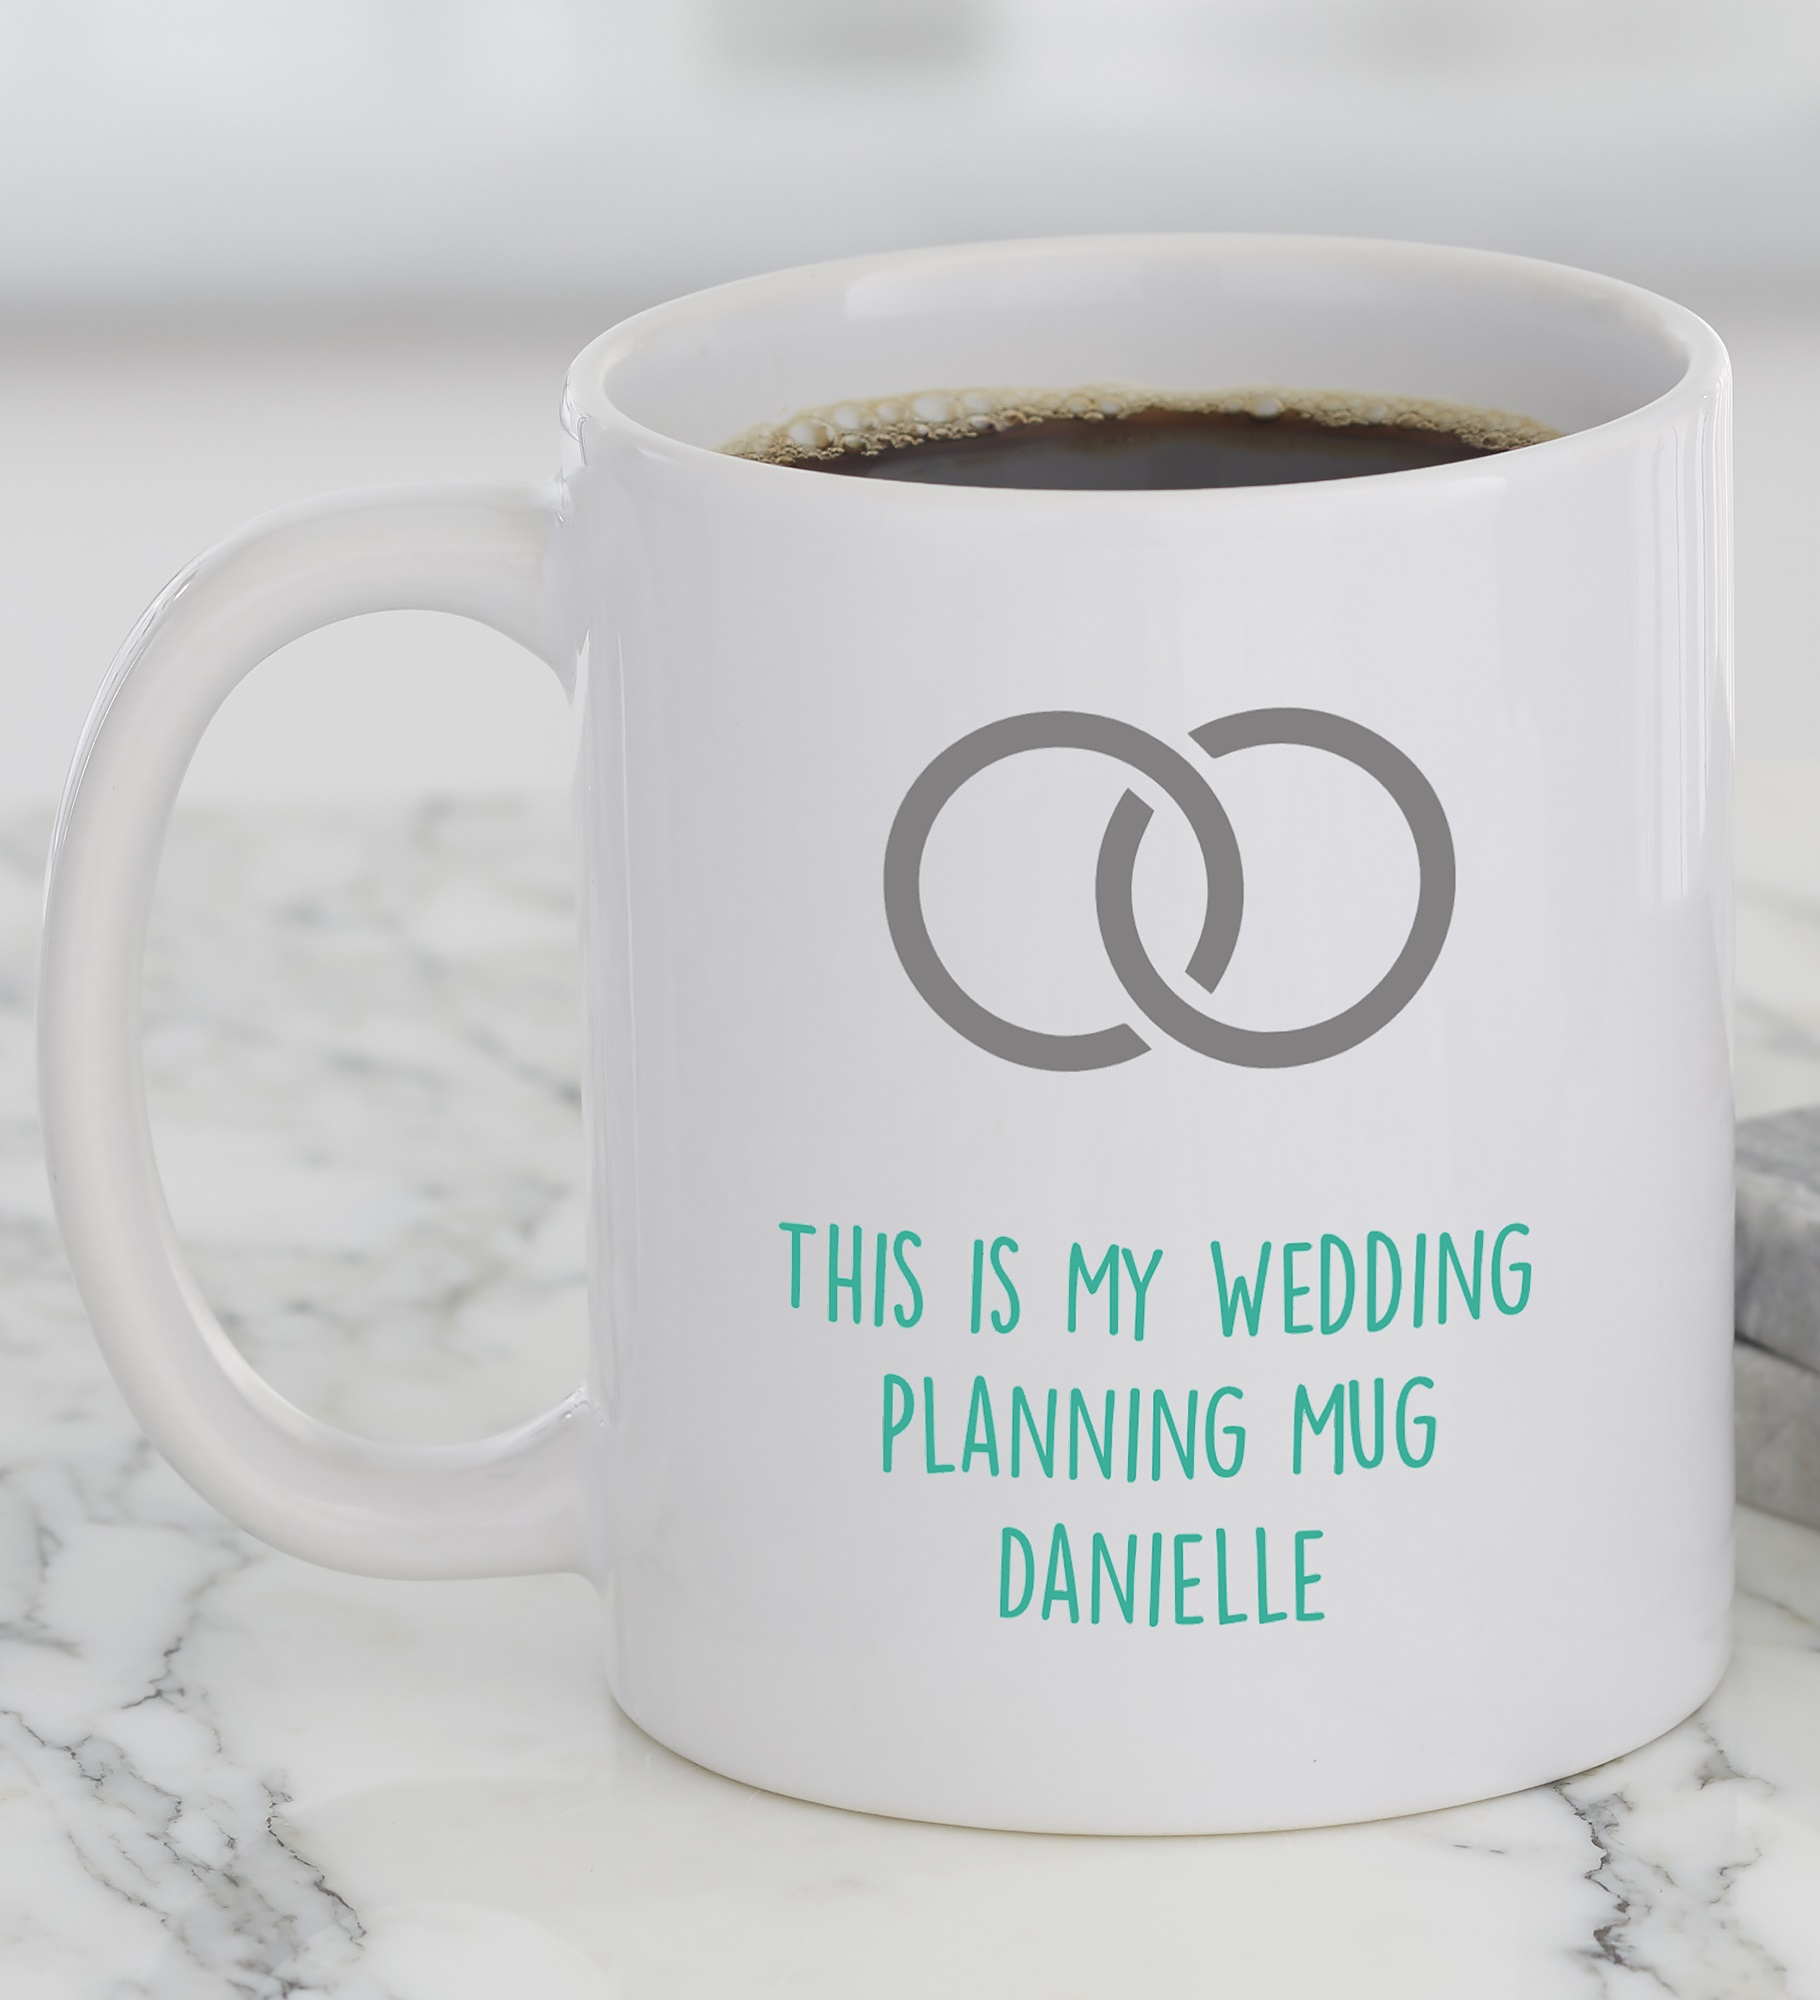 Choose your Icon Personalized Wedding Coffee Mugs